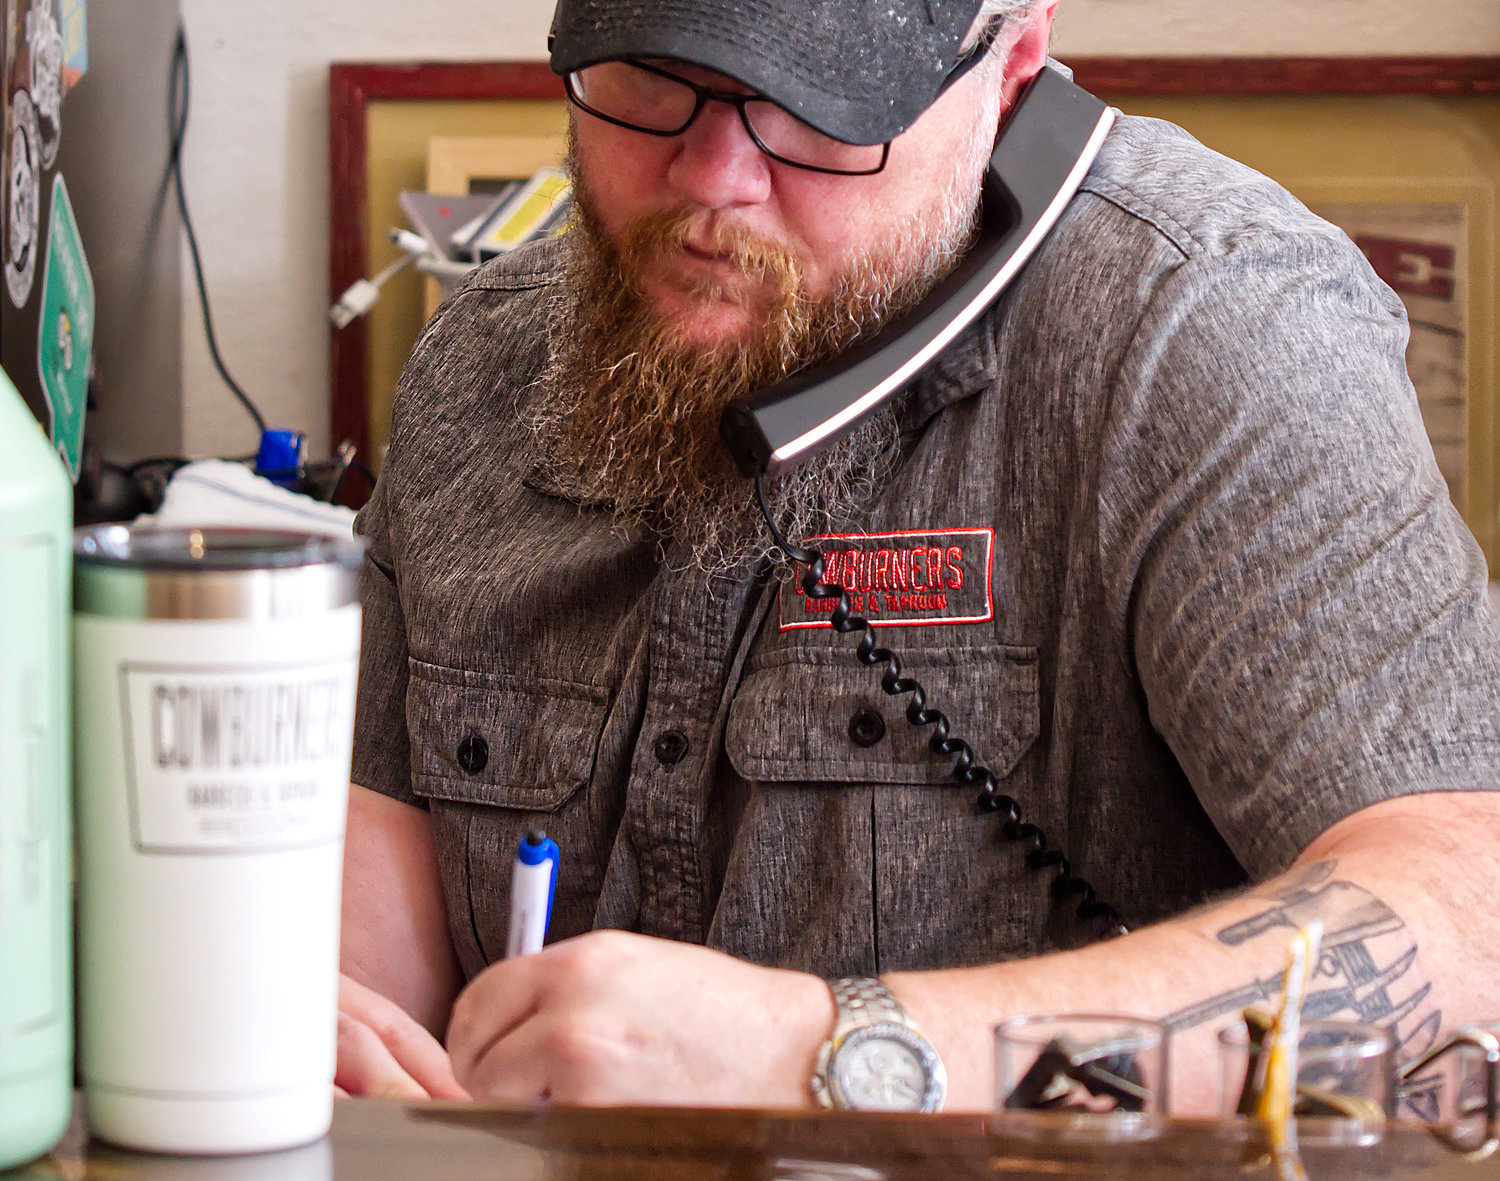 Jason Herring, owner of Cowburners BBQ and Taproom in downtown Mineola, takes a call-in order at the restaurant, which has remained open for takeout service during the coronavirus restrictions which have been ongoing for more than a month. The governor announced restaurants can reopen on Friday while following social distancing and capacity requirements.